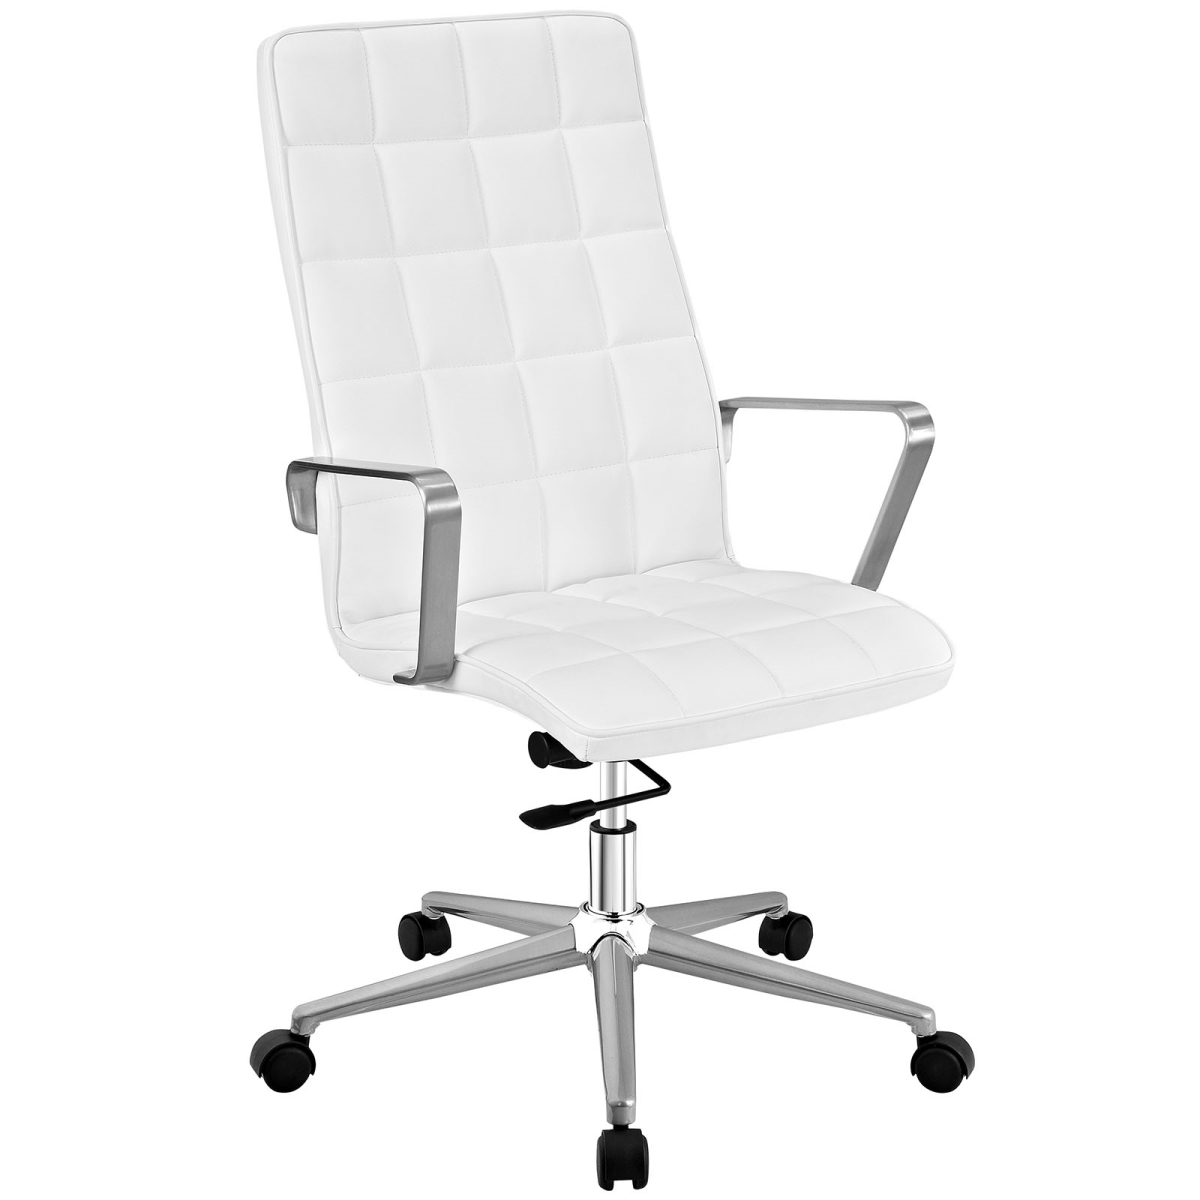 Modway Eei-2126-whi Tile Highback Office Chair, White